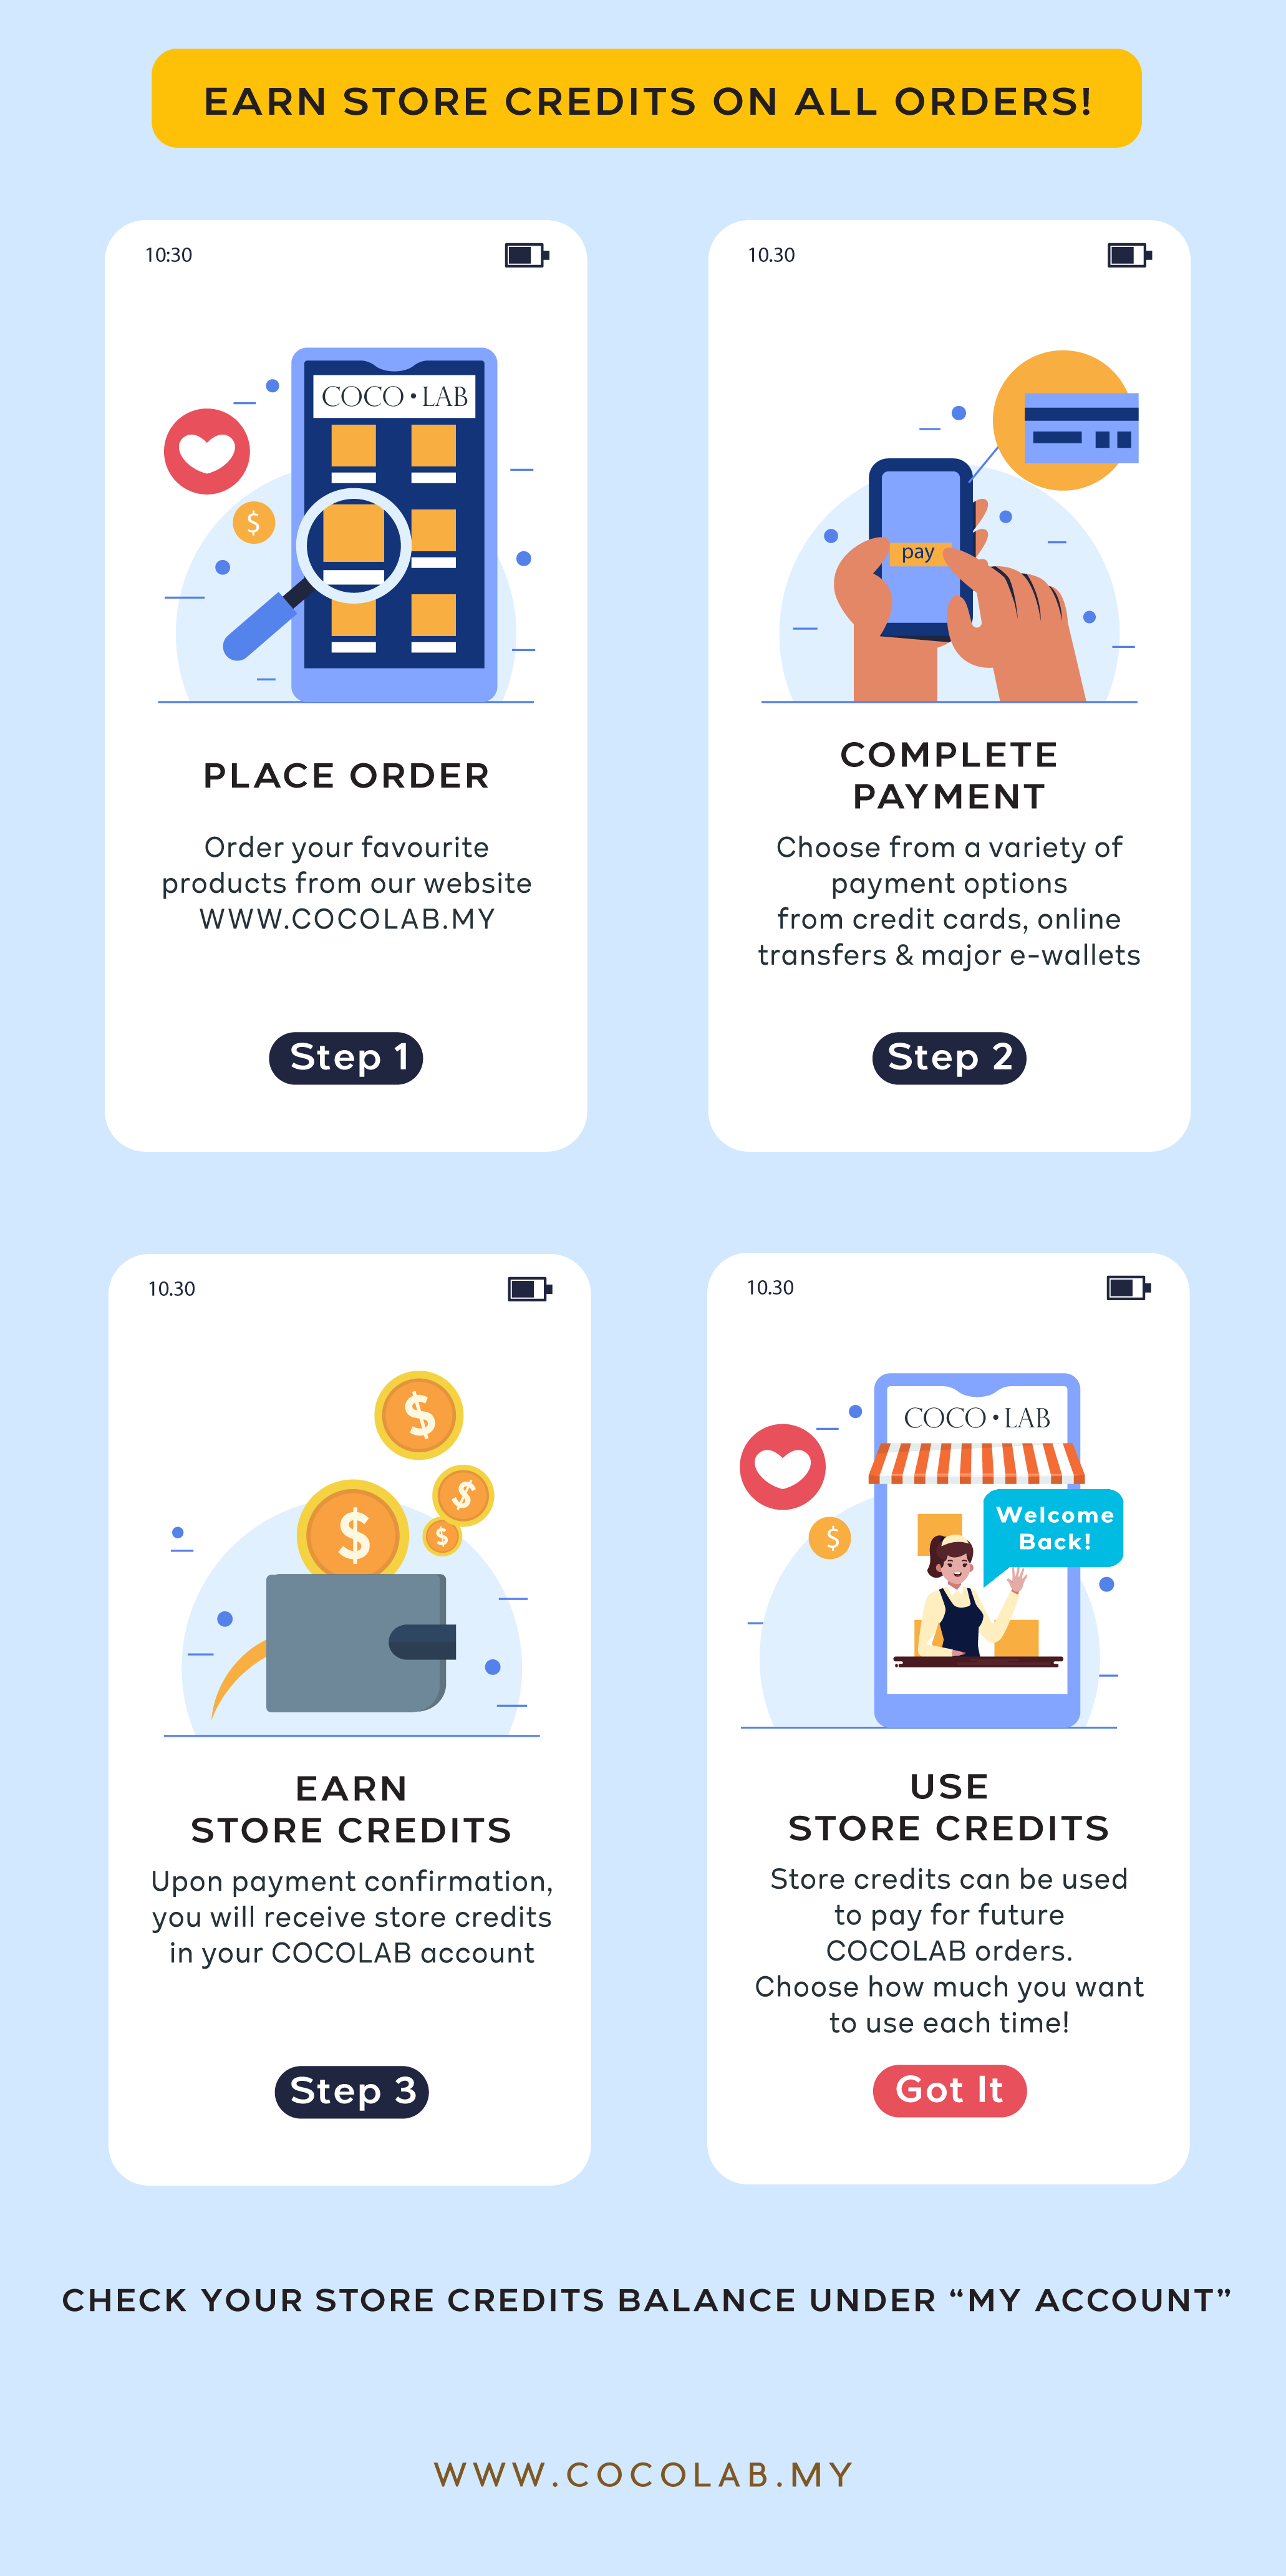 COCOLAB Store Credits - Steps